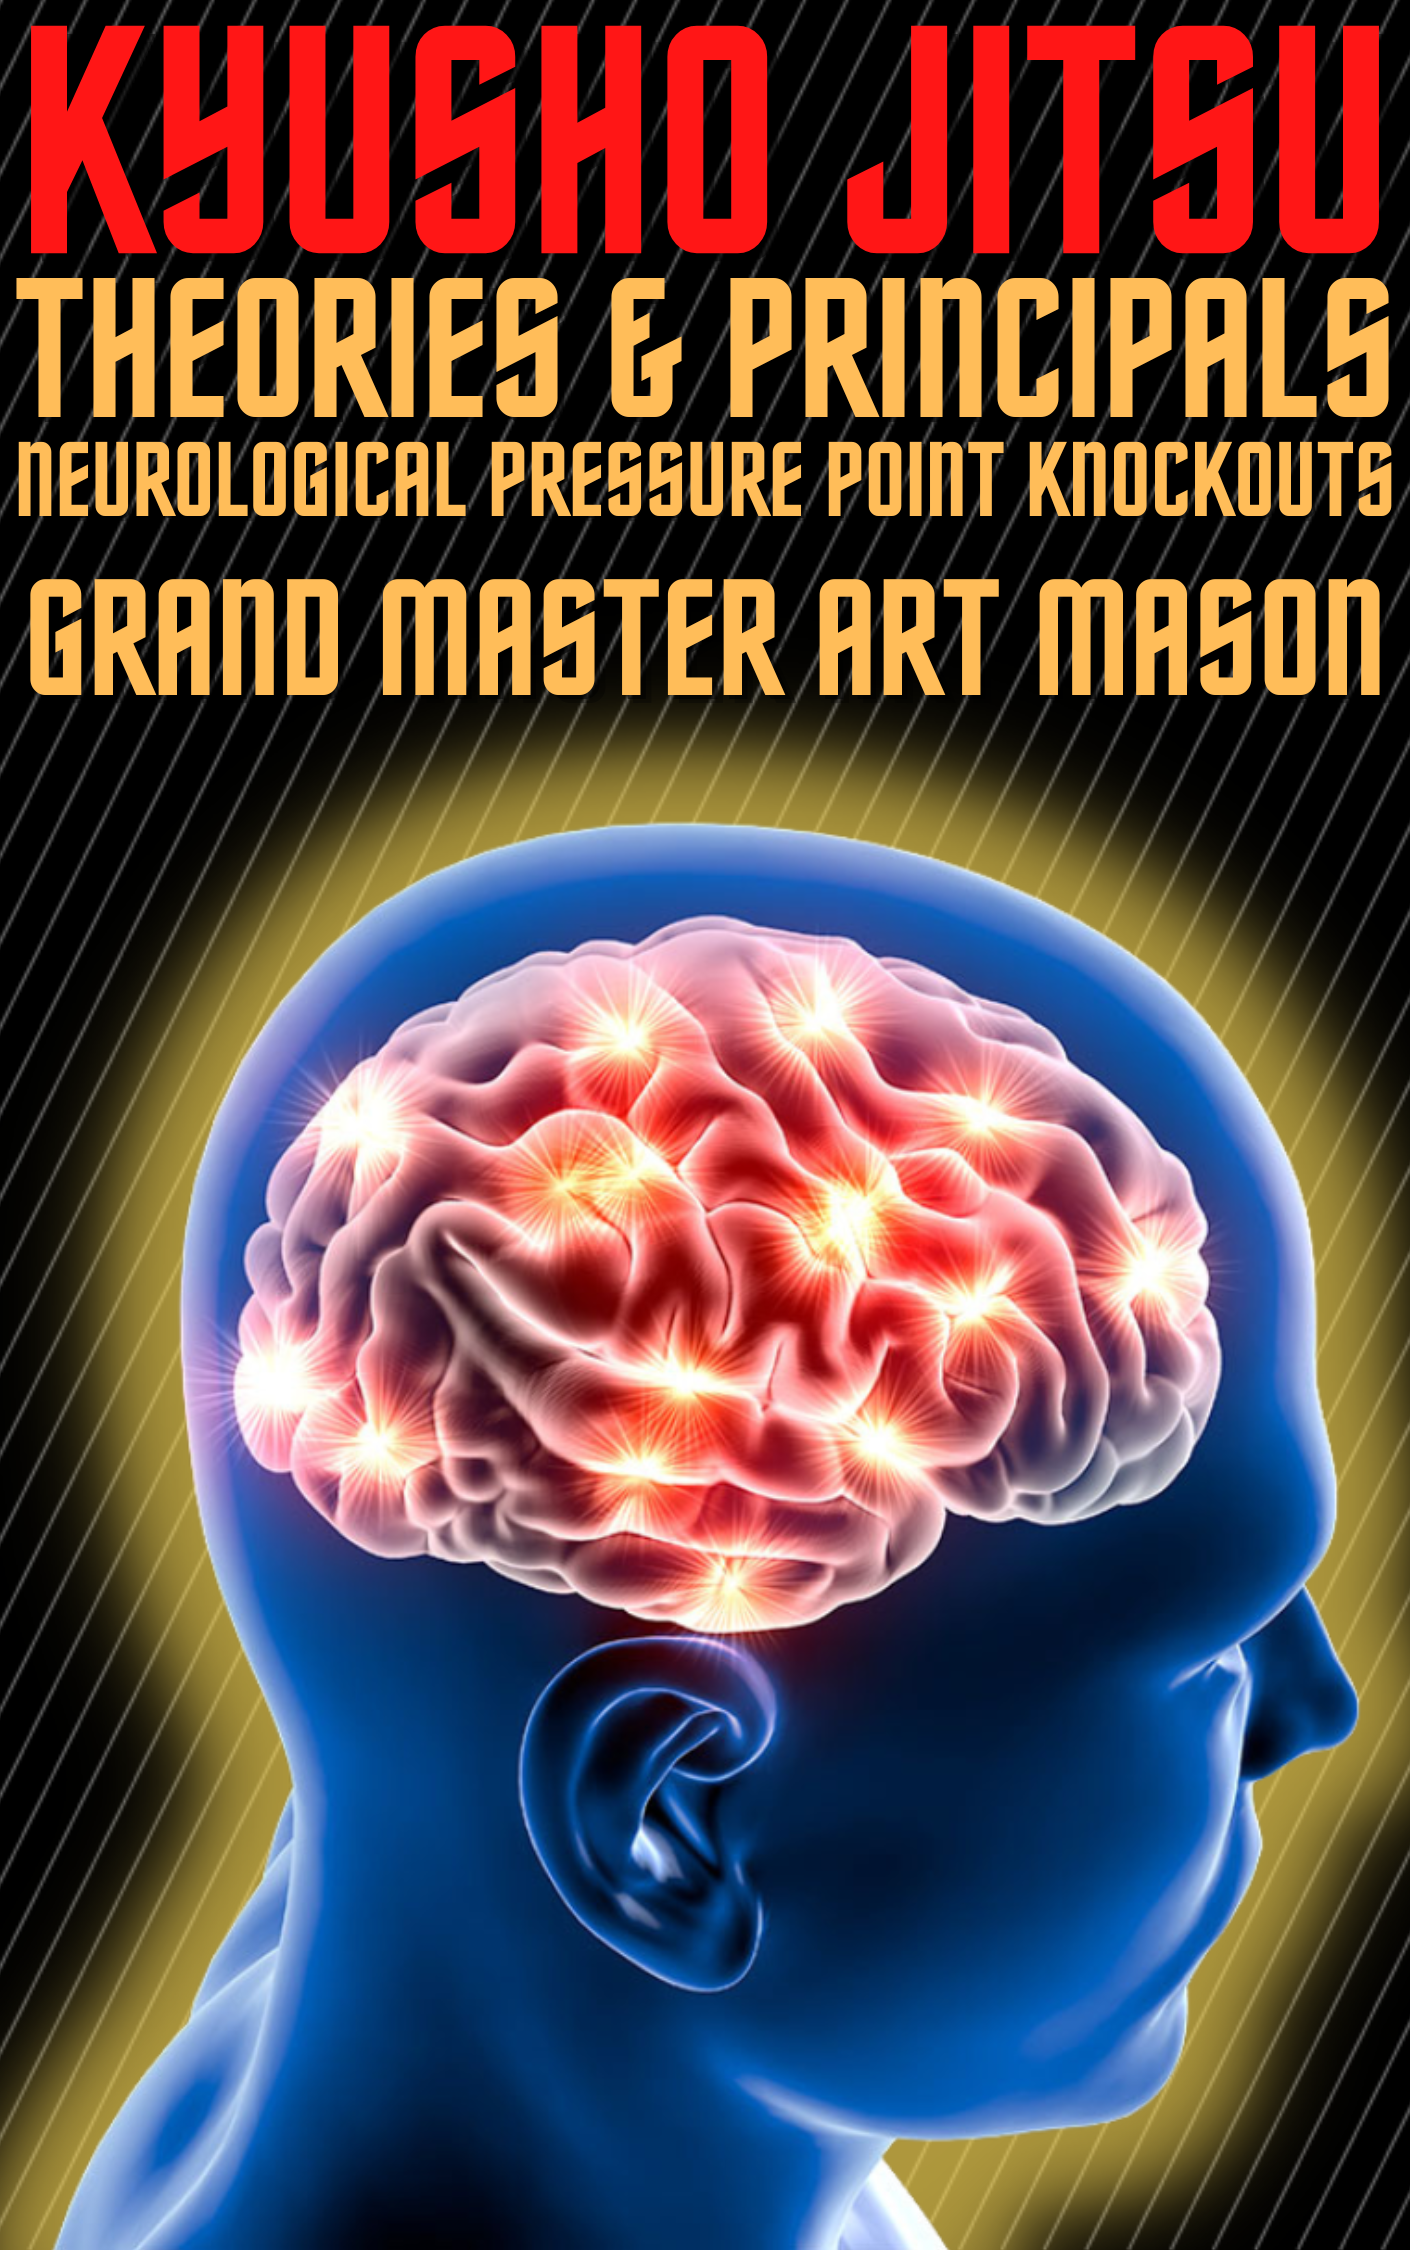 * Neurological Pressure Point Knockouts